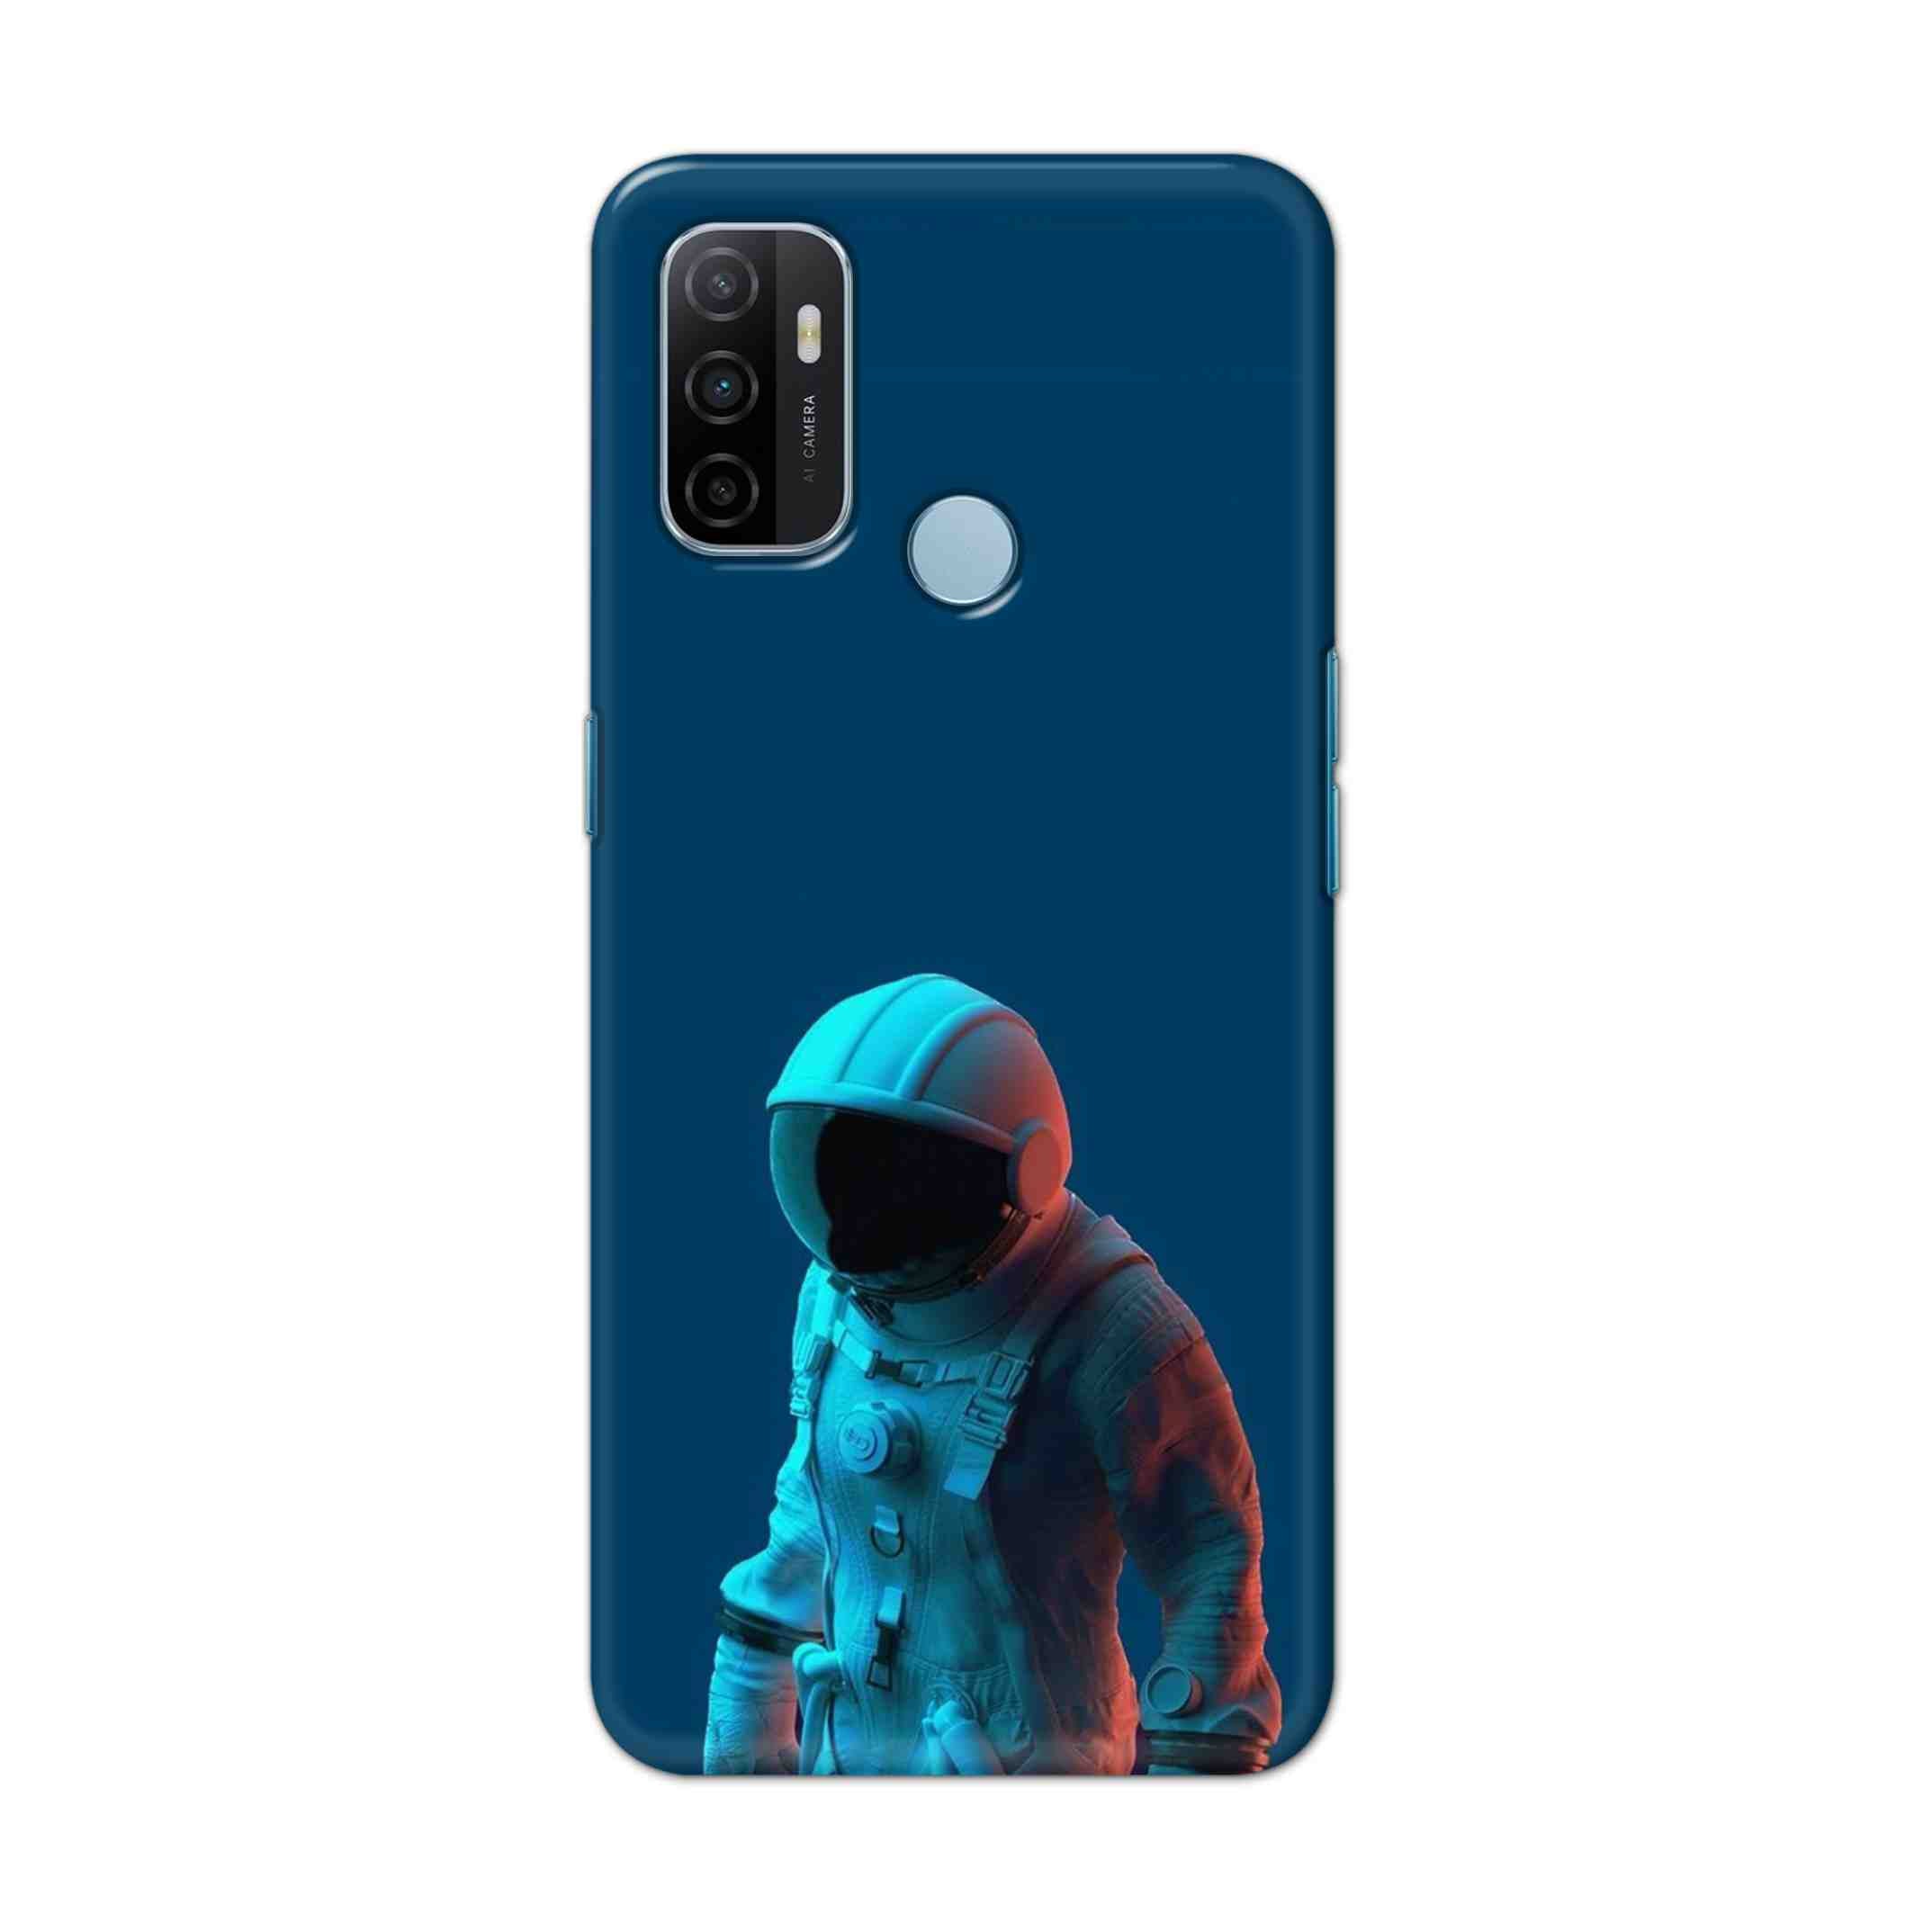 Buy Blue Astronaut Hard Back Mobile Phone Case Cover For OPPO A53 (2020) Online